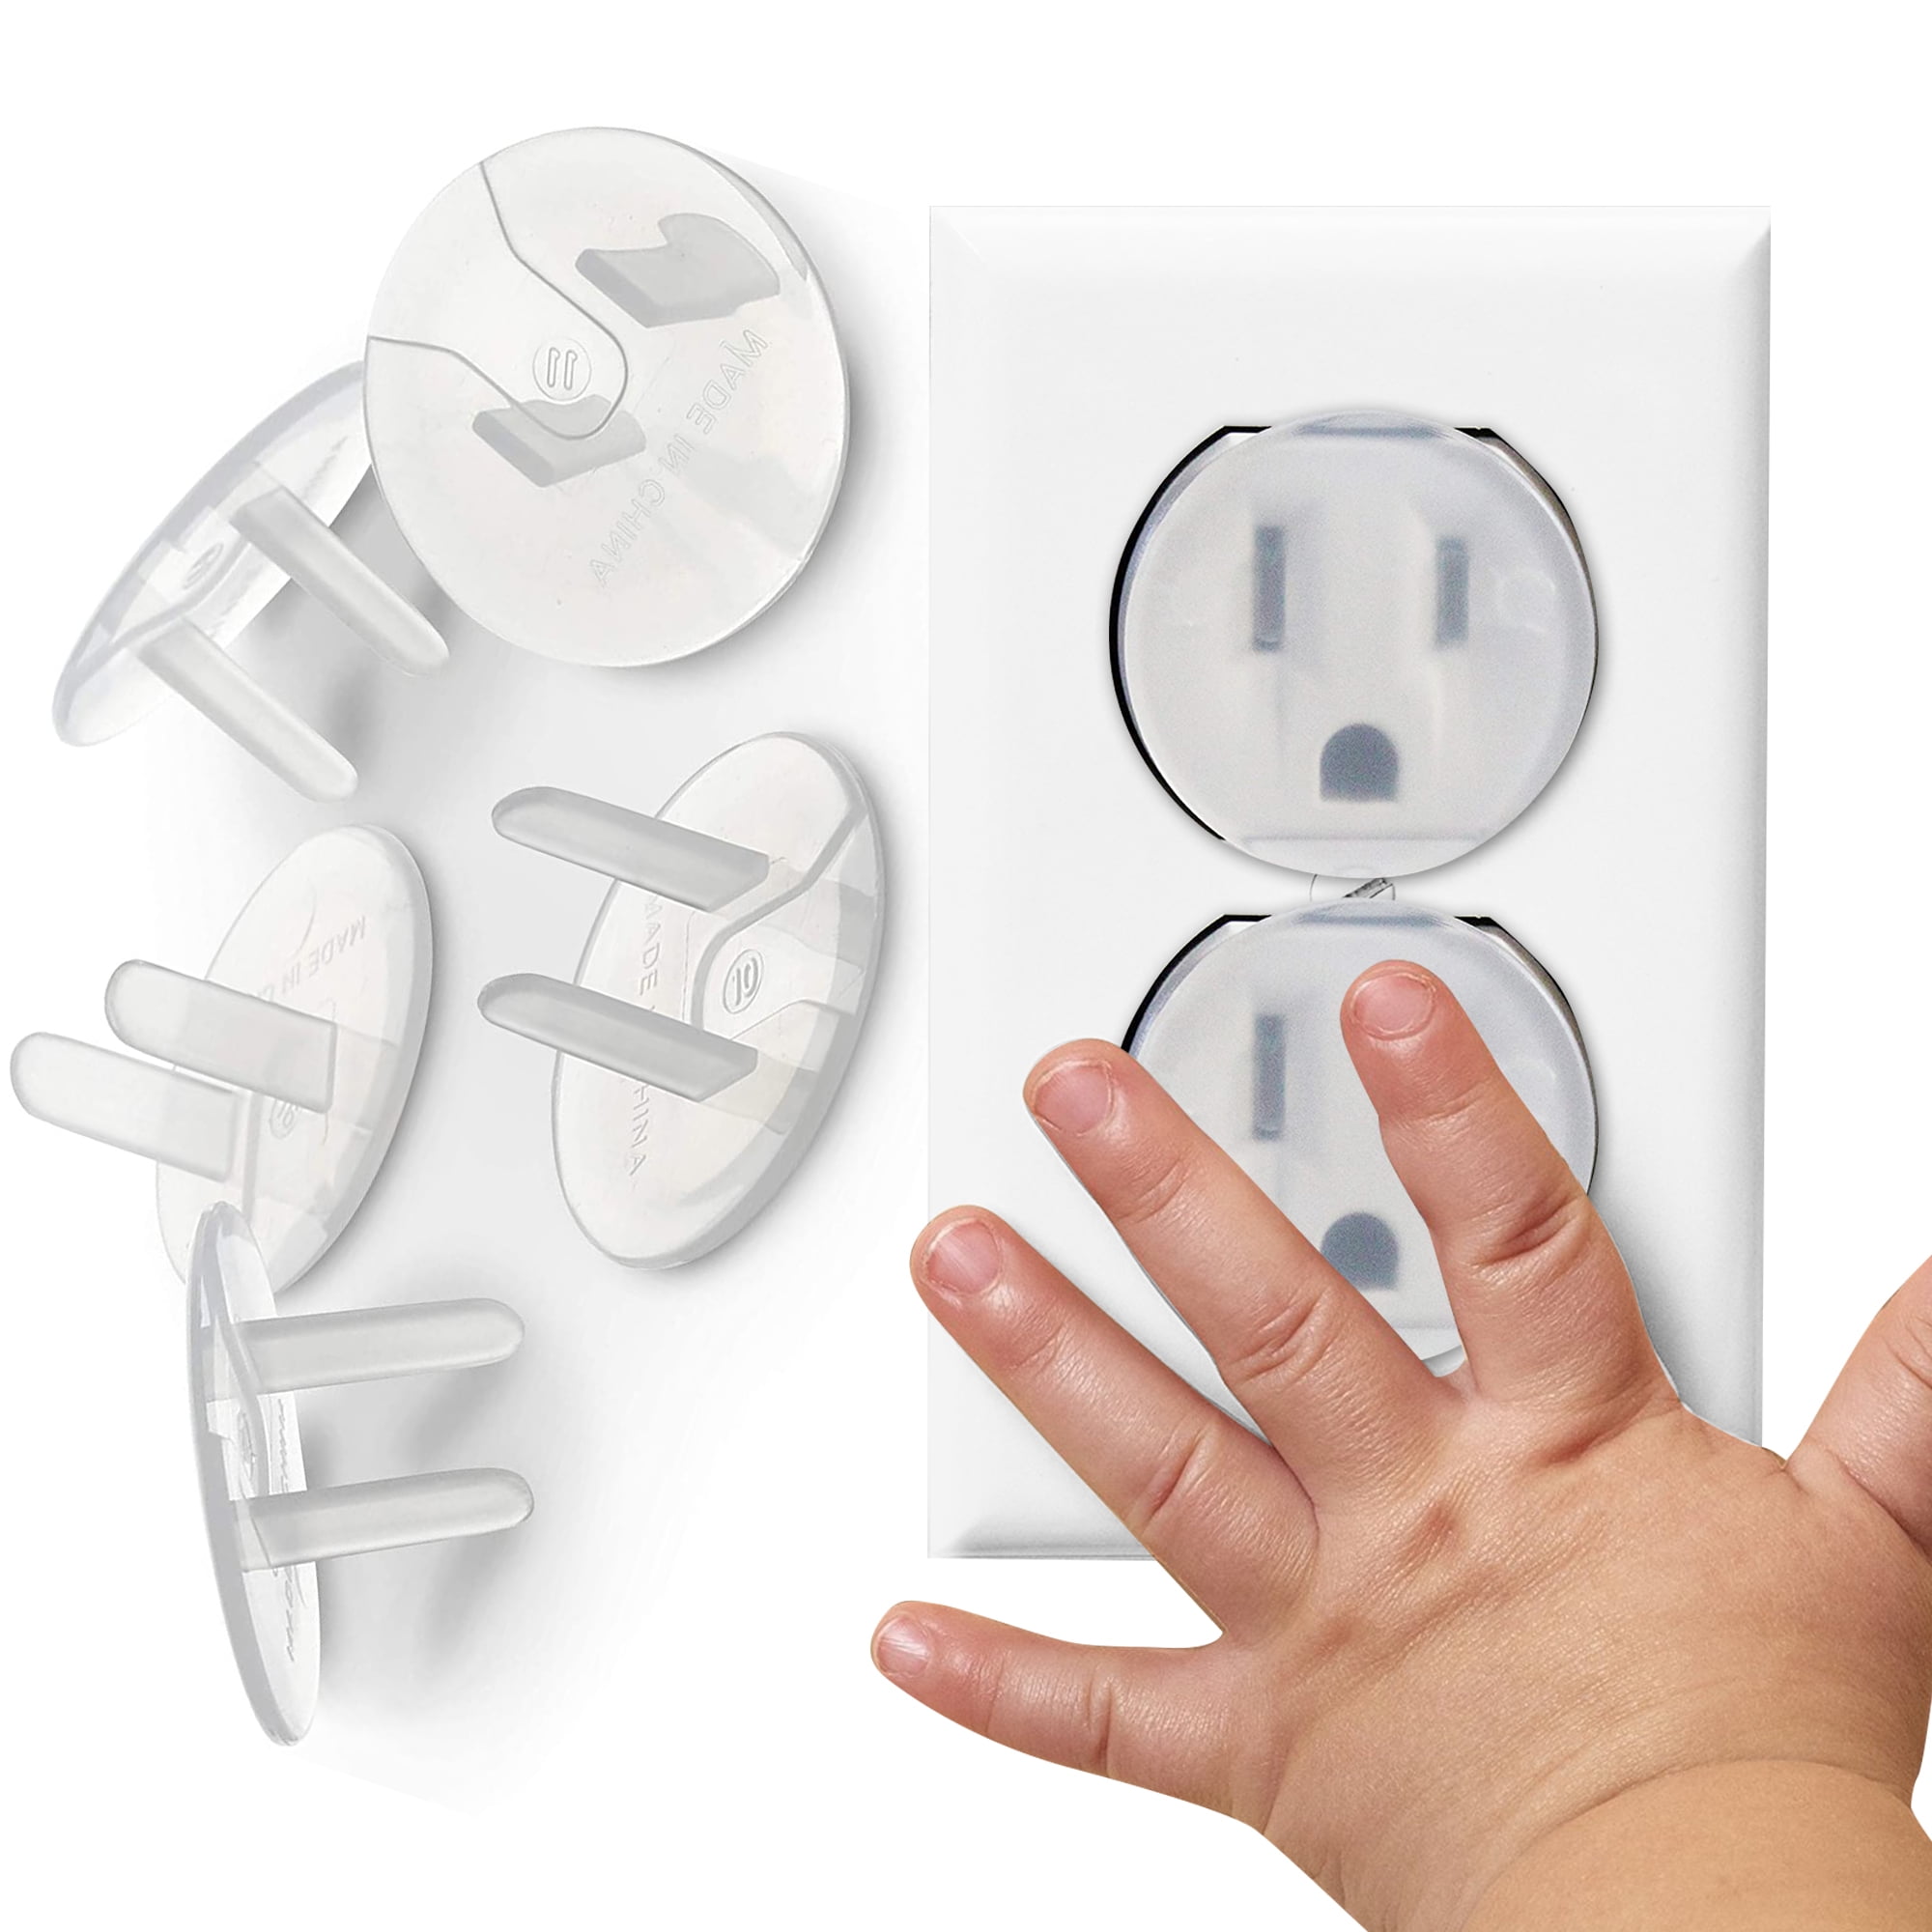 How to baby proof electrical outlets 